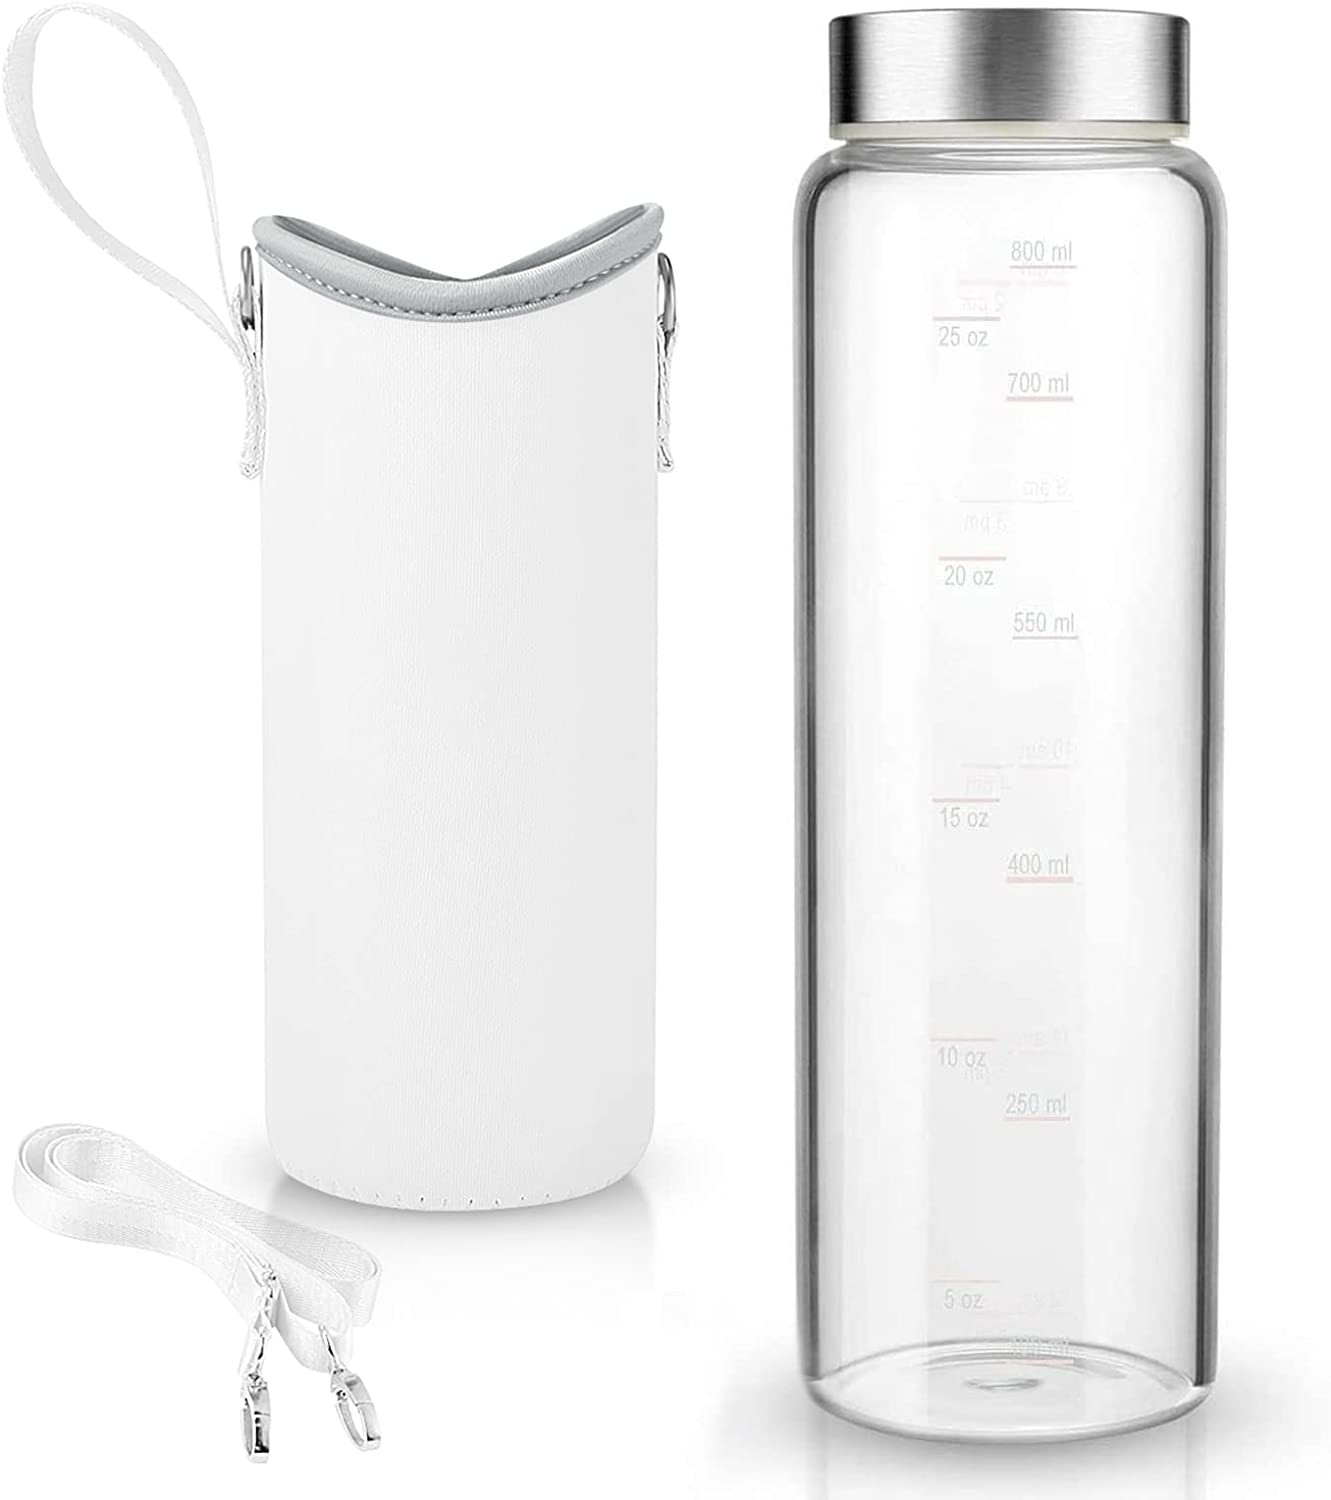 32 Oz Glass Water Bottle - Nylon Bottle Protection Sleeves, Bamboo Lid, and 1L Time Marked Measurements, Reusable, Eco-Friendly, Safe for Hot Liquids Tea Coffee Daily